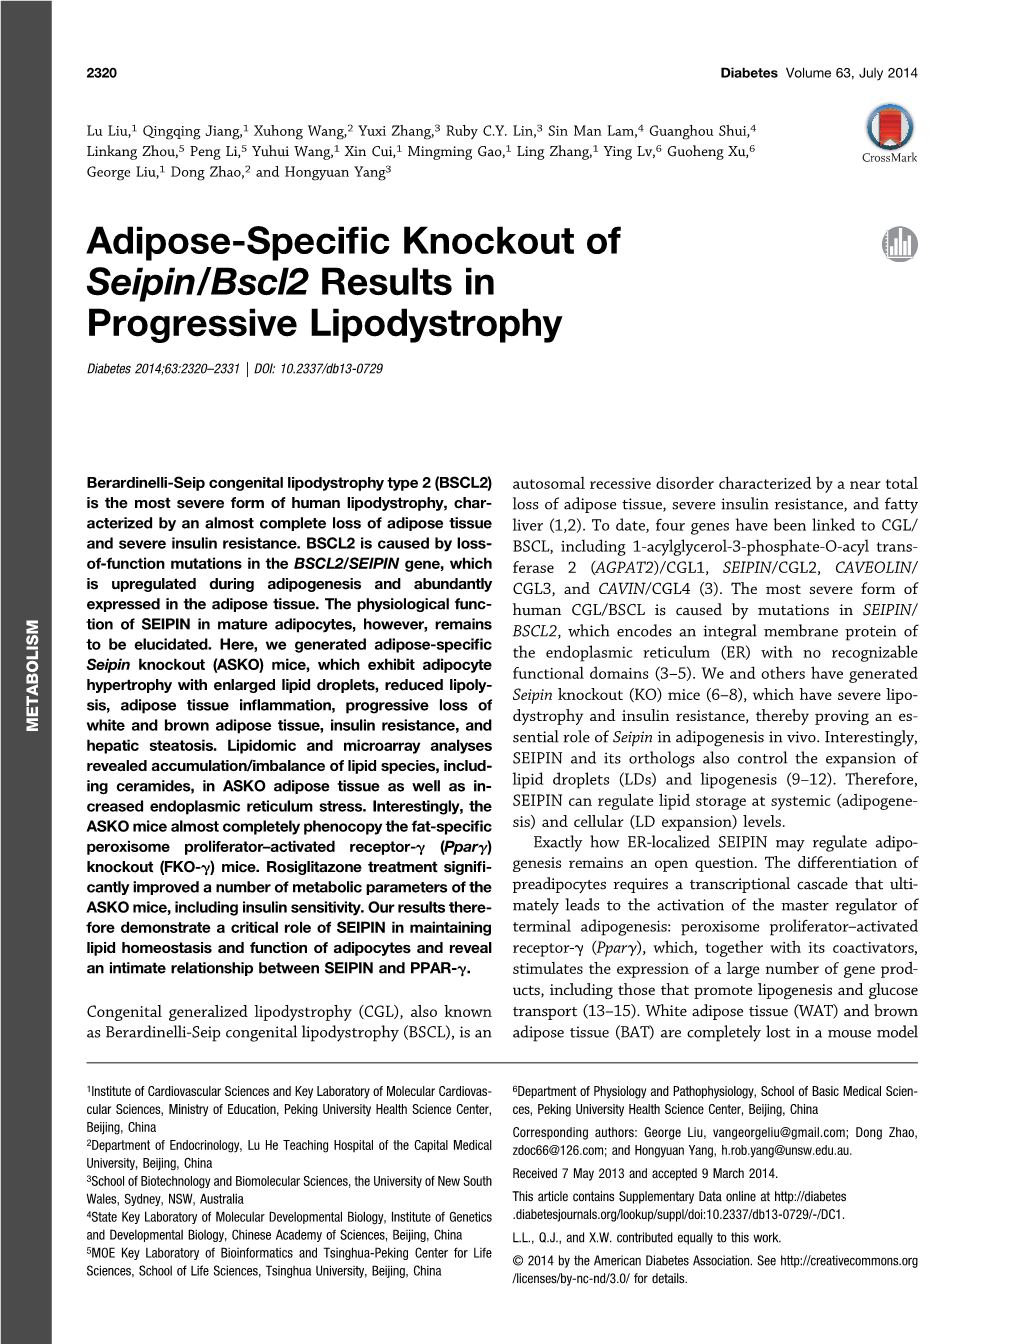 Adipose-Specific Knockout of Seipin/Bscl2 Results in Progressive